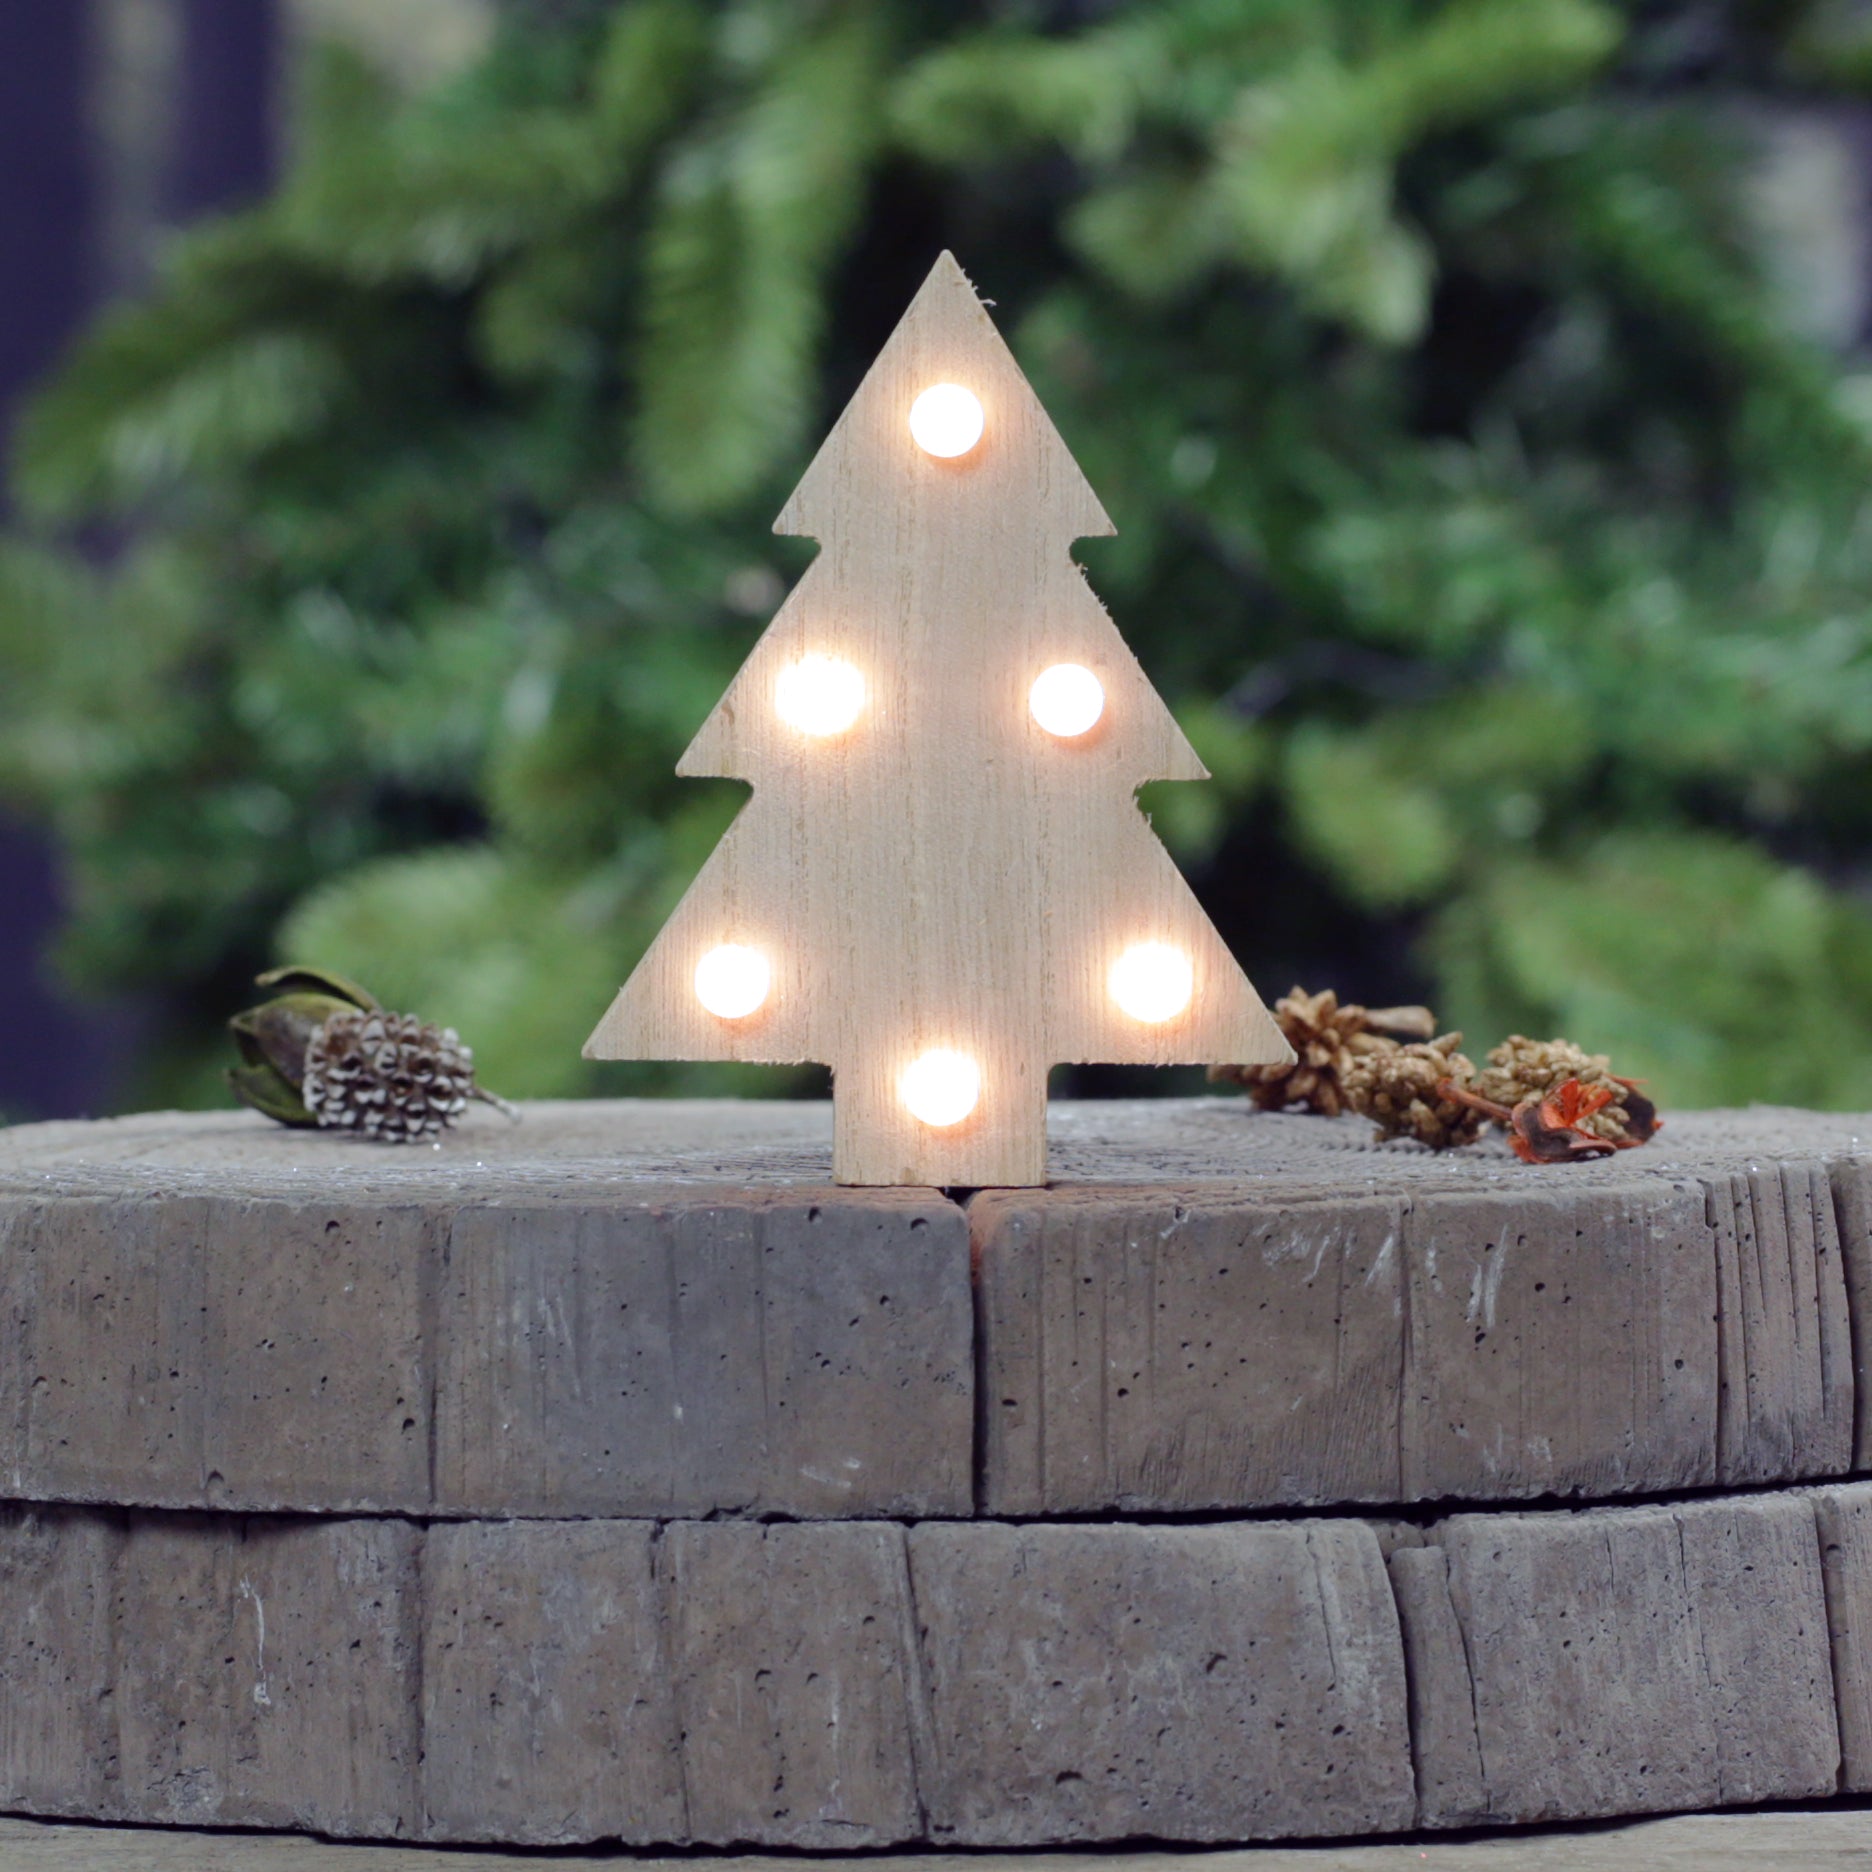 Wooden Light Up Decorations - Set of 4